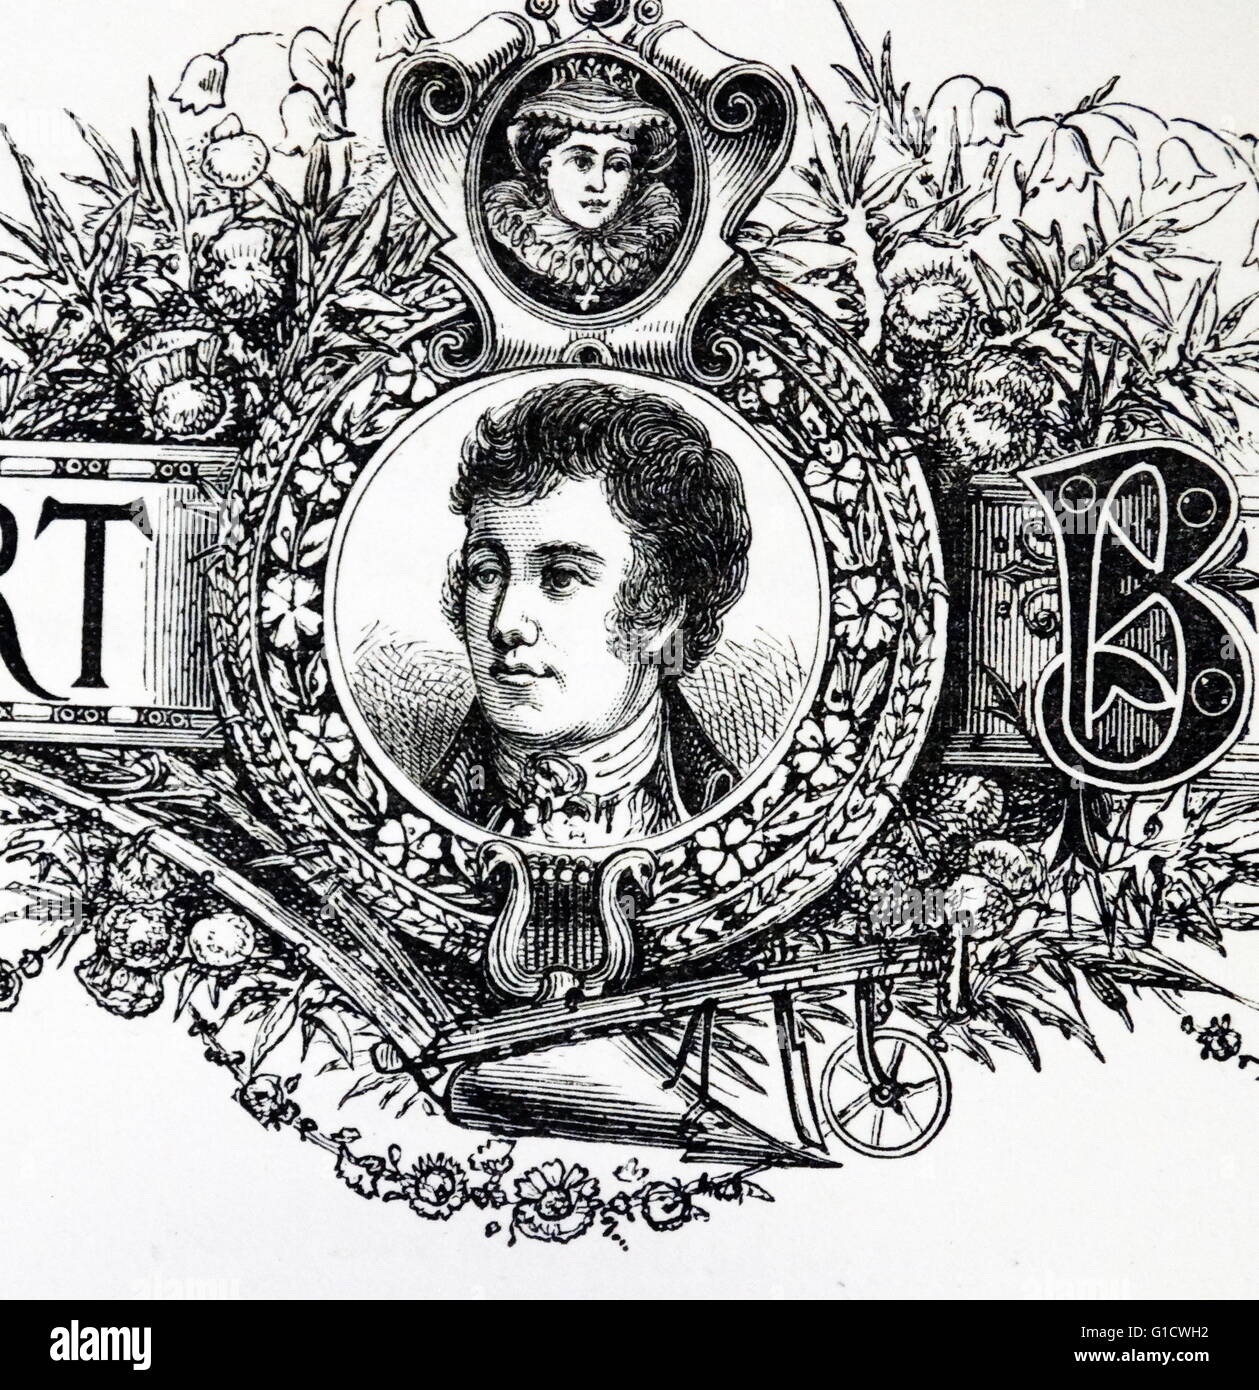 Engraved portrait of Robert Burns (1759-1796) a Scottish poet and lyricist. Dated 18th Century Stock Photo